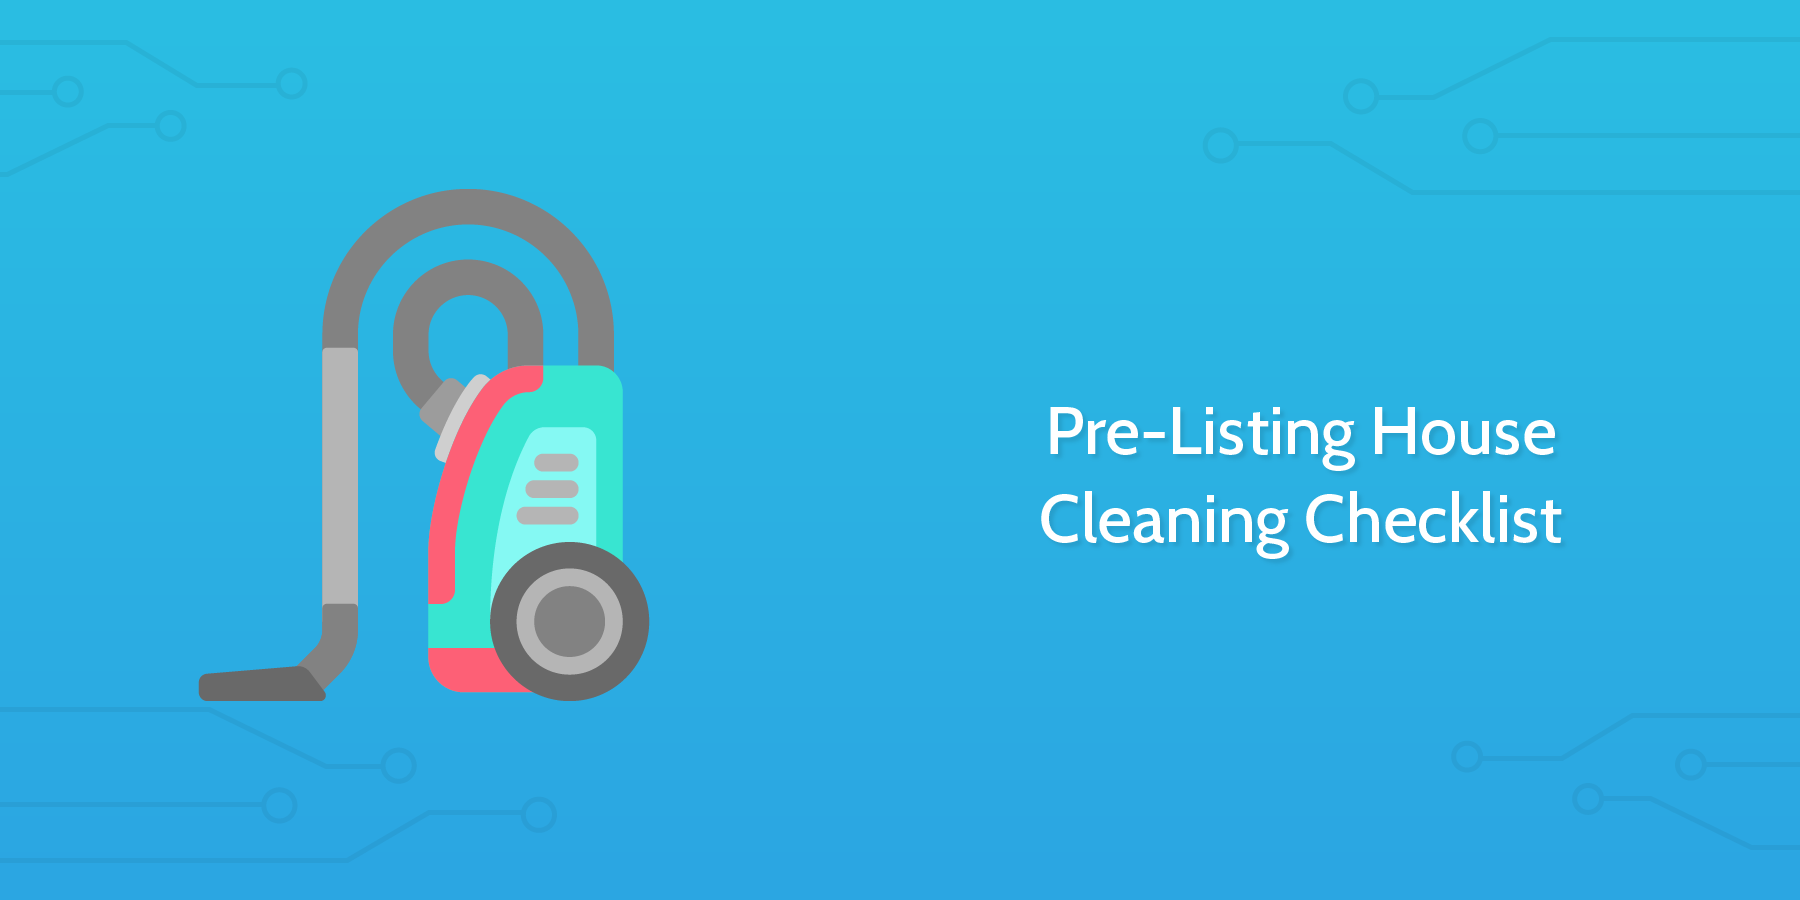 Pre-Listing House Cleaning Checklist